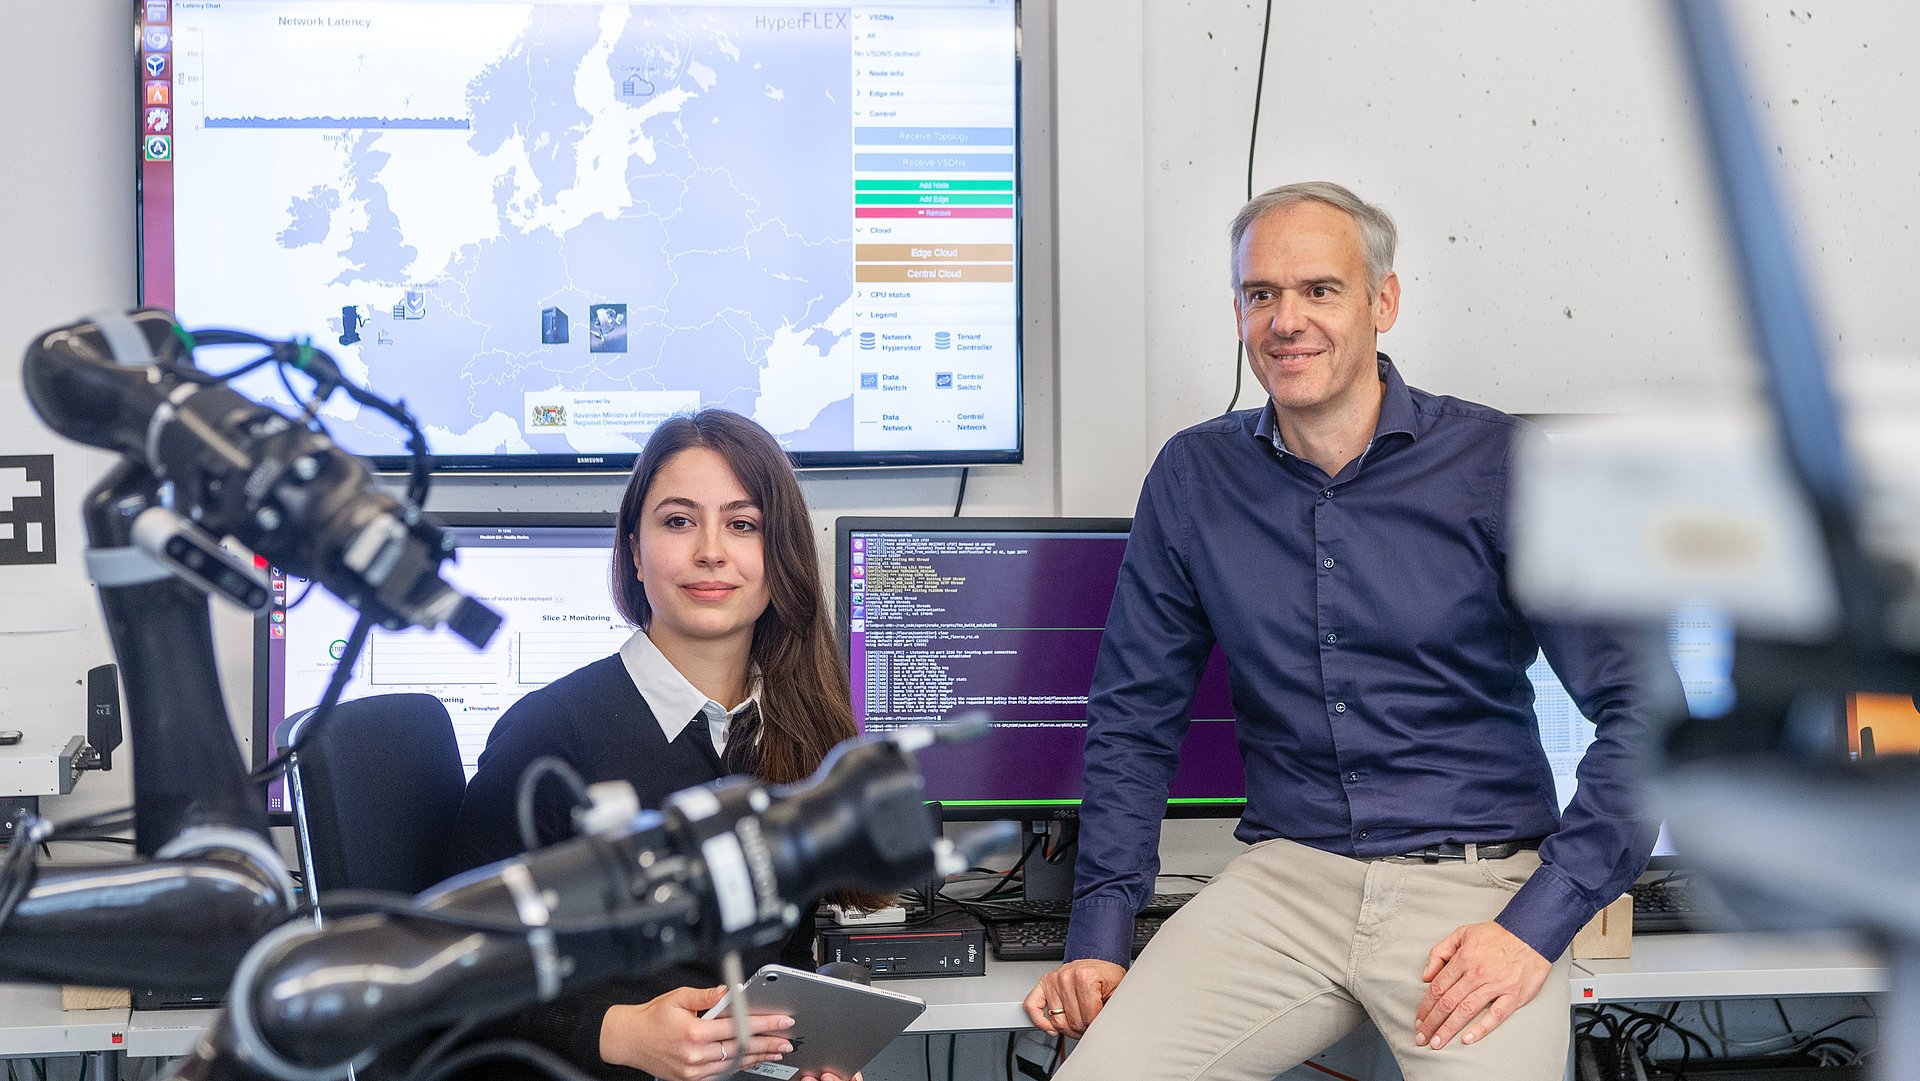 Prof. Wolfgang Kellerer is investigating a high-performance 6G network 